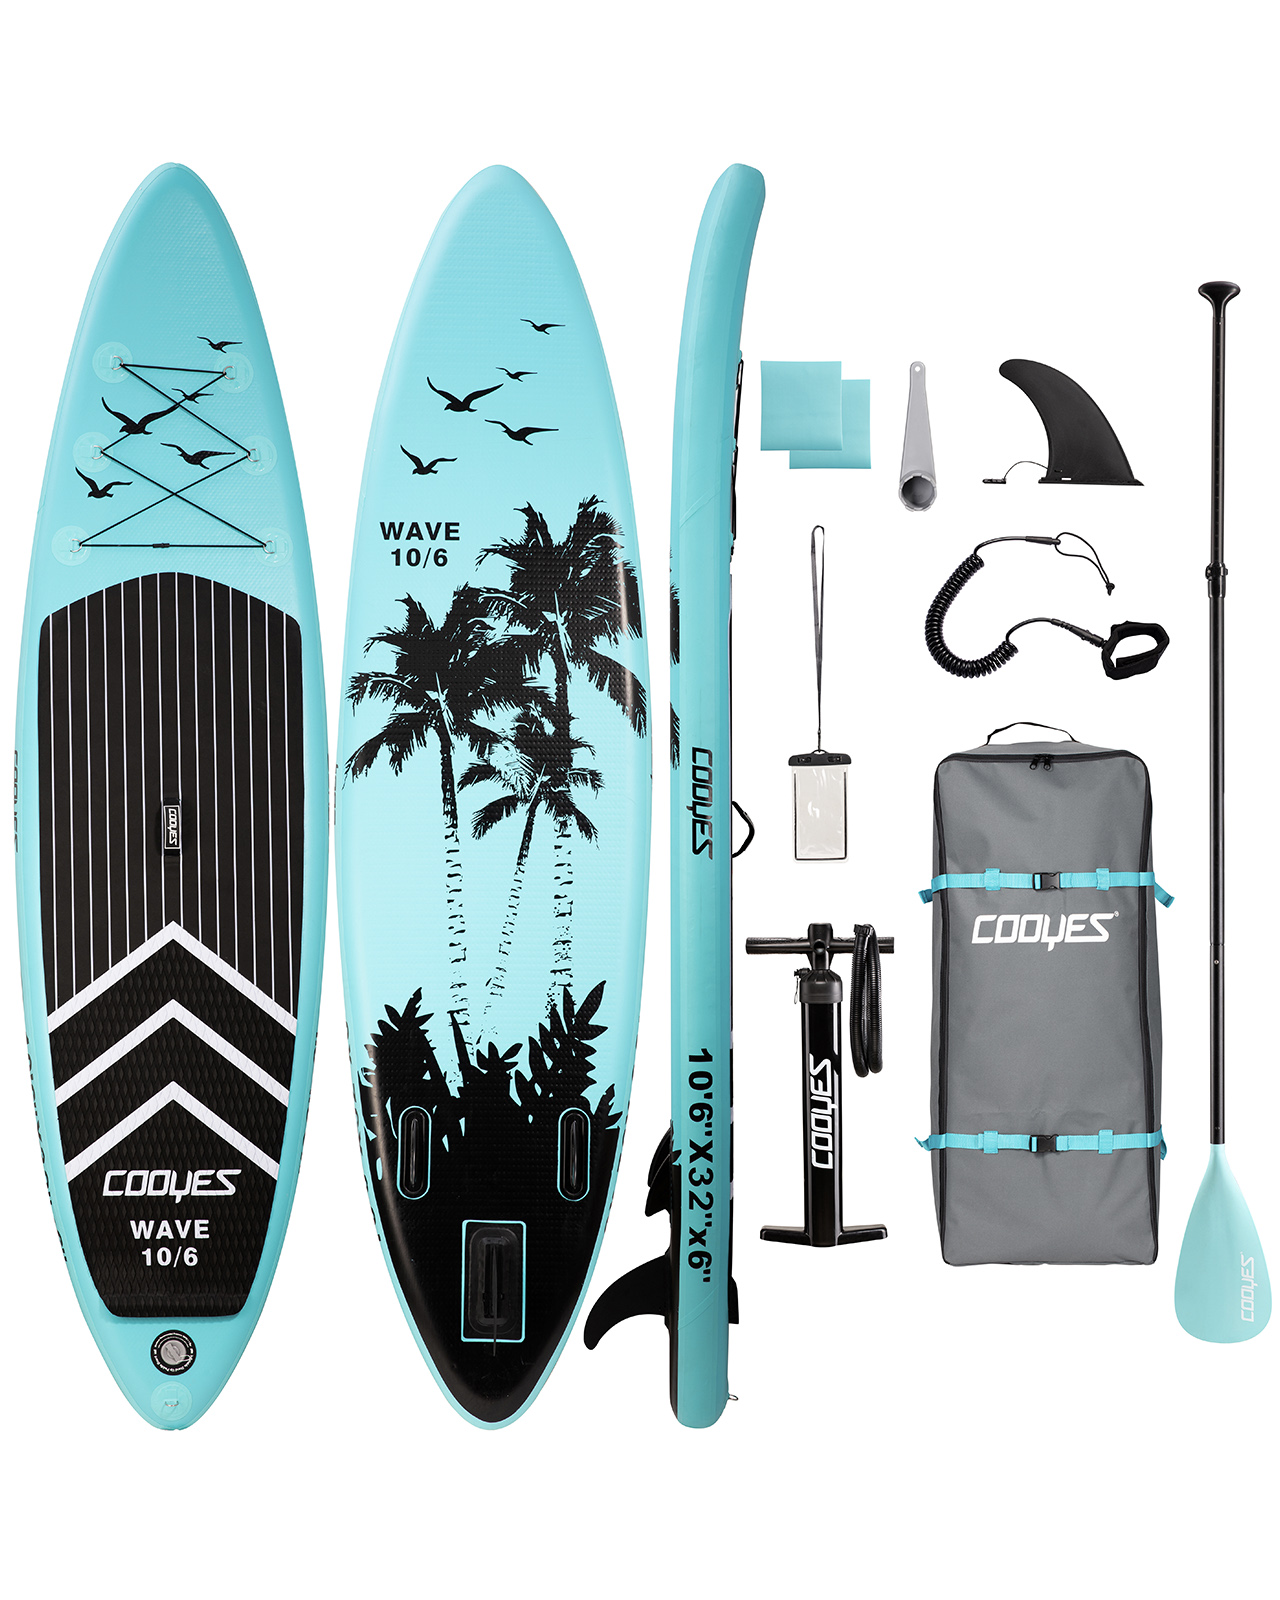 COOYES Inflatable Stand Up Paddle Board 10'6" with Free Premium SUP Accessories & Backpack, Non-Slip Deck. Bonus Waterproof Bag, Leash, Paddle and Hand Pump - image 1 of 7